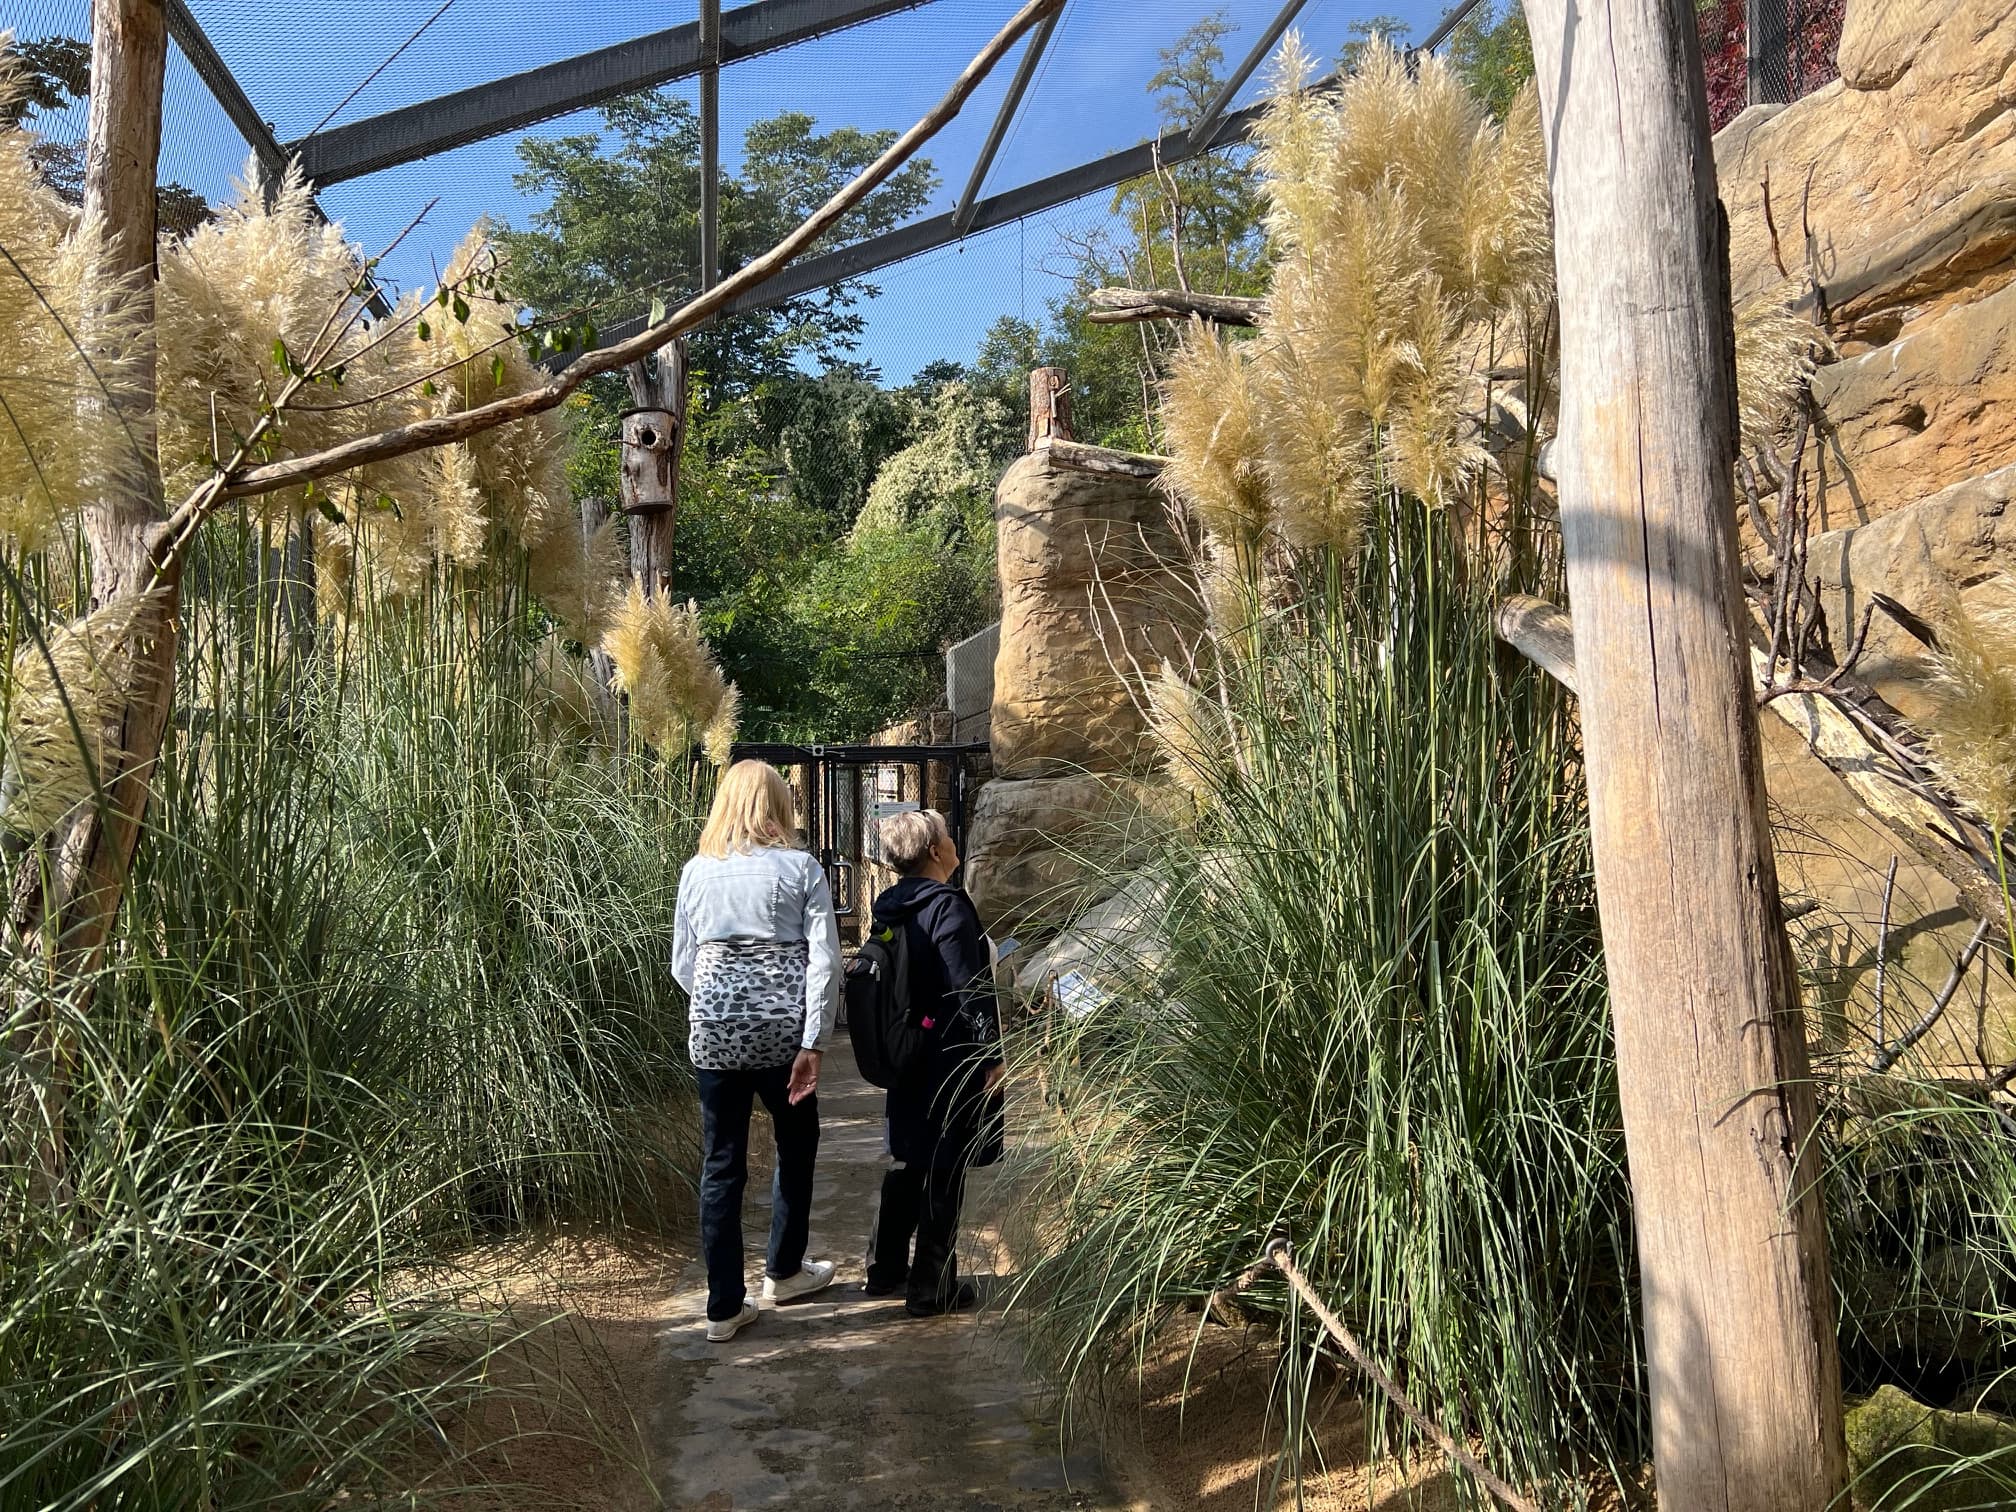 A path through a zoo or animal park, flanked by tall pampas grasses and other green plants. Two people are walking along the path, surrounded by natural rocks and wooden structures, with a large net over the area, presumably to protect or demarcate the area. It is a sunny day and the light is filtering through the netting, adding depth to the natural colours and textures.